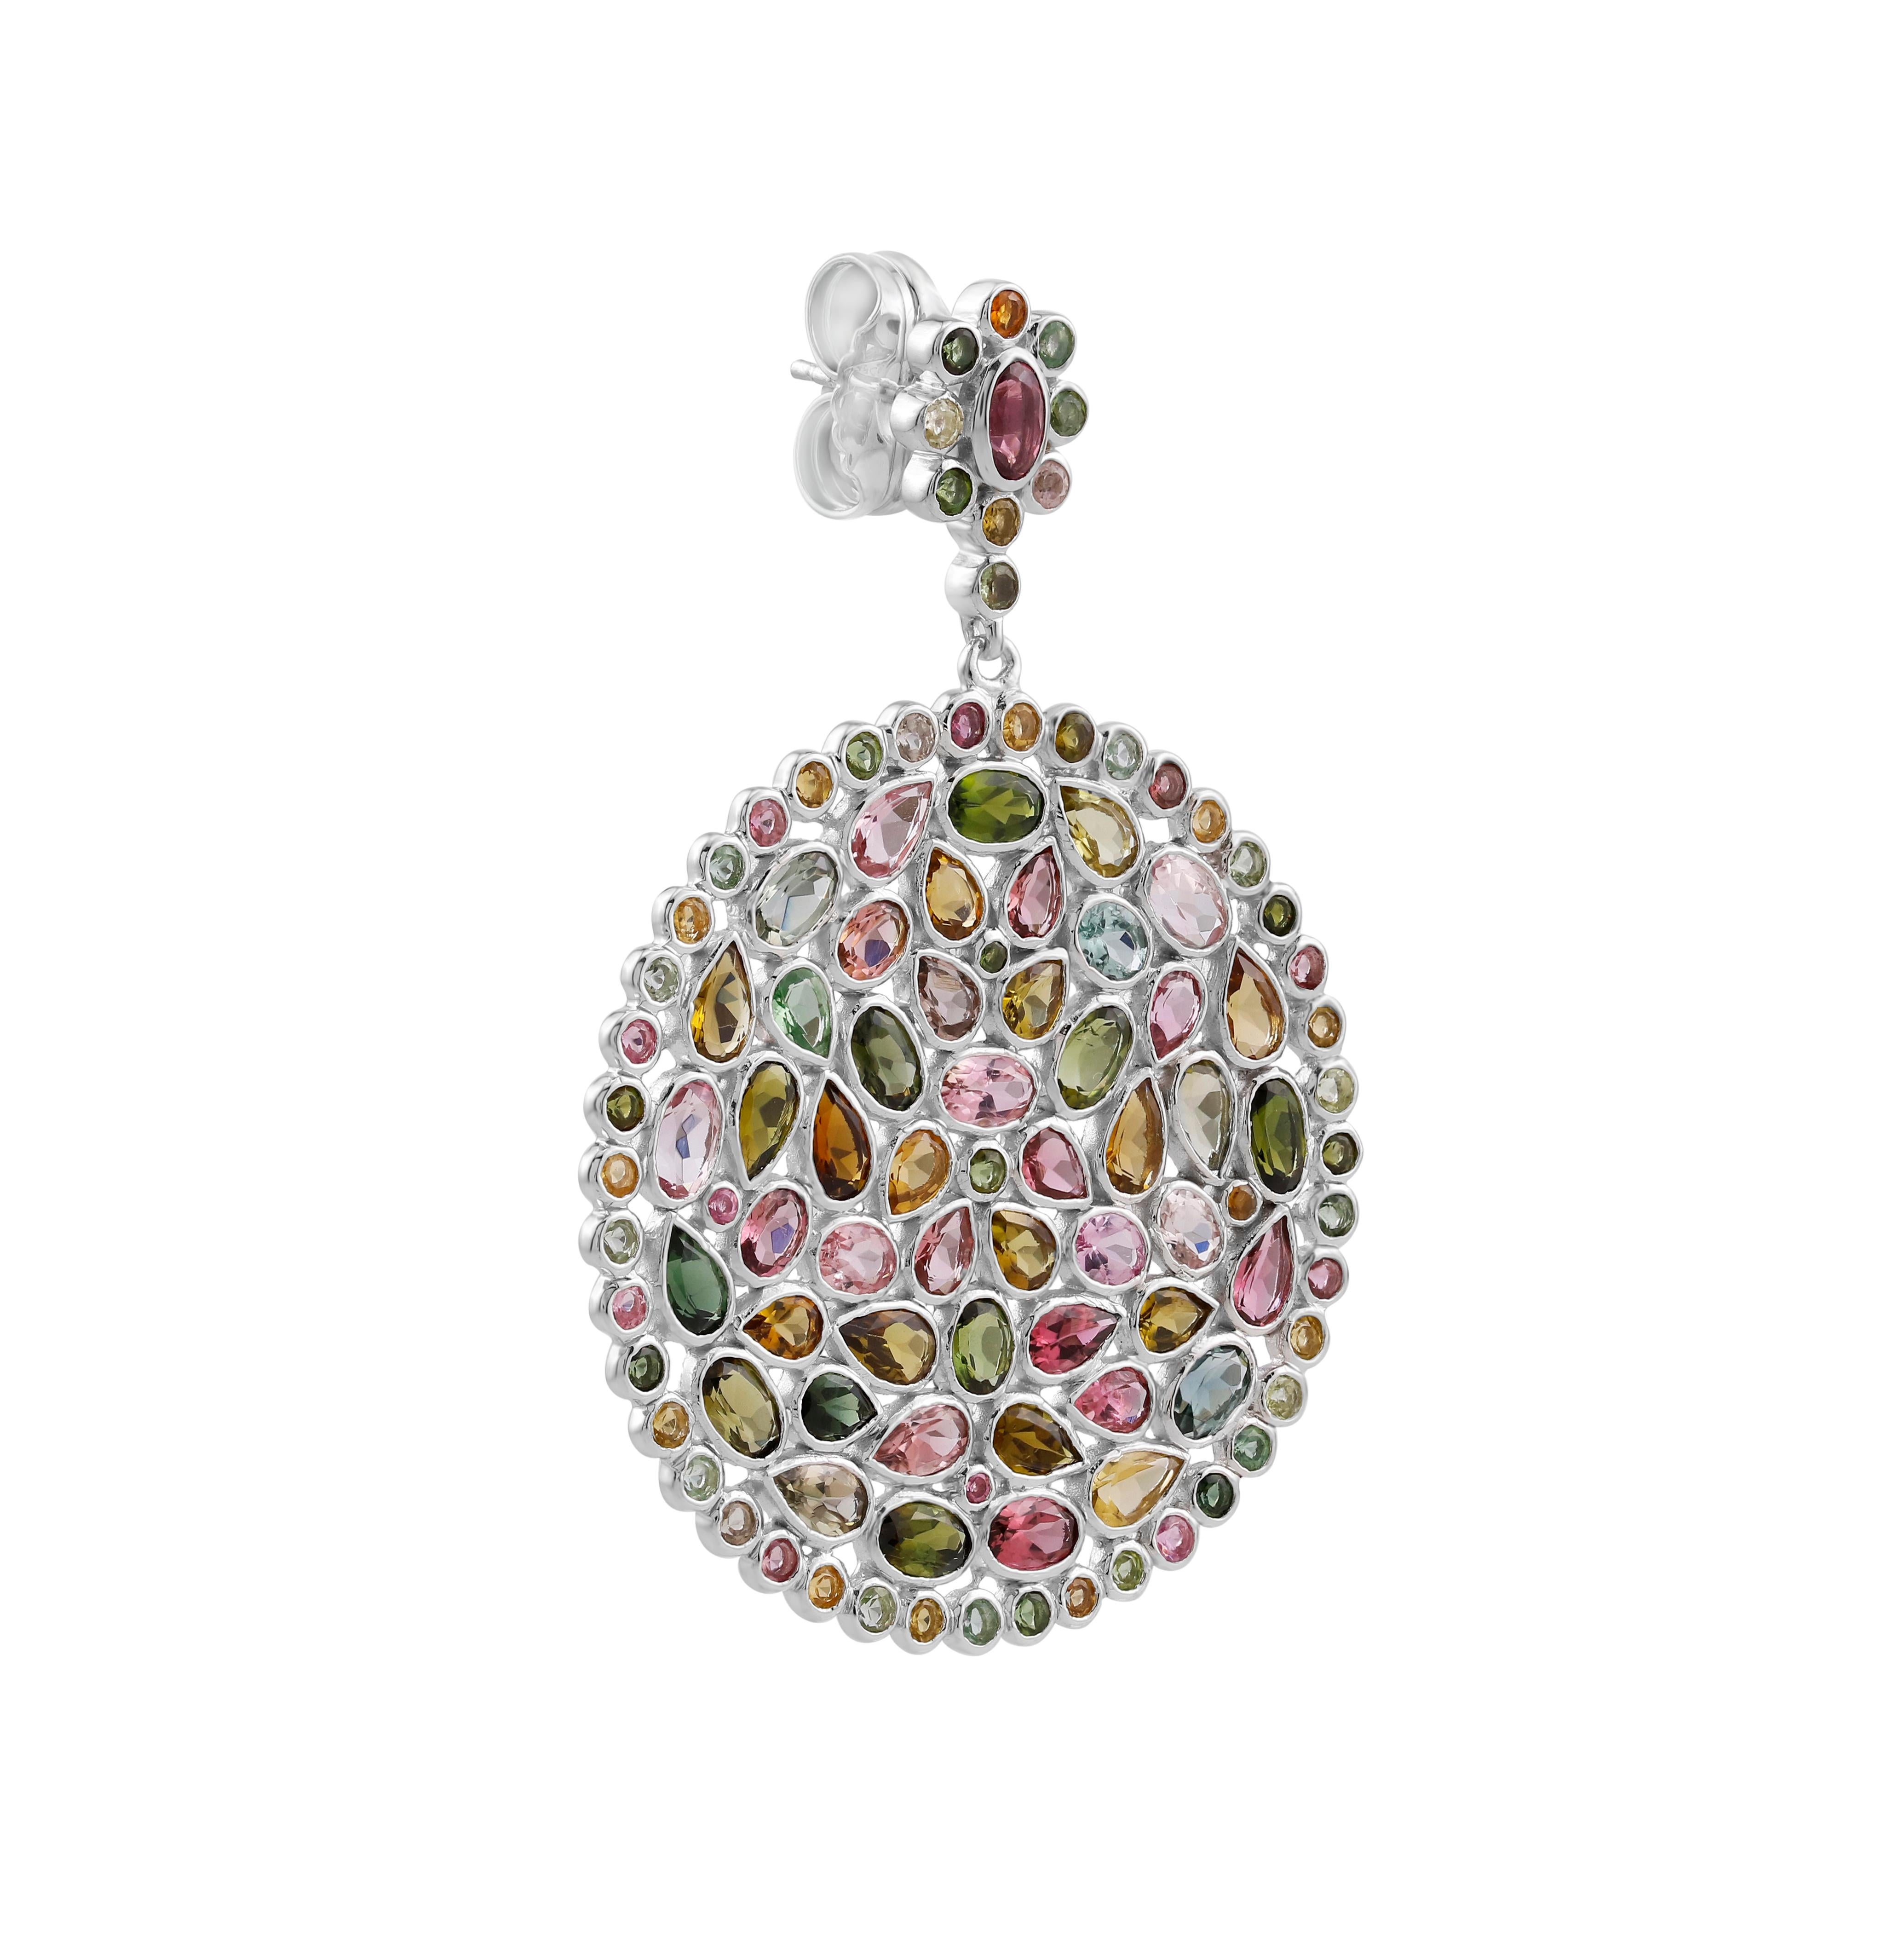 Display double the dazzle with this rainbow-like pair handcrafted in sterling silver. You'll definitely love the colors of the sparkling multi-tourmalines dangling from lovely floral tops. Pop in this pair and add some colorful flair to your